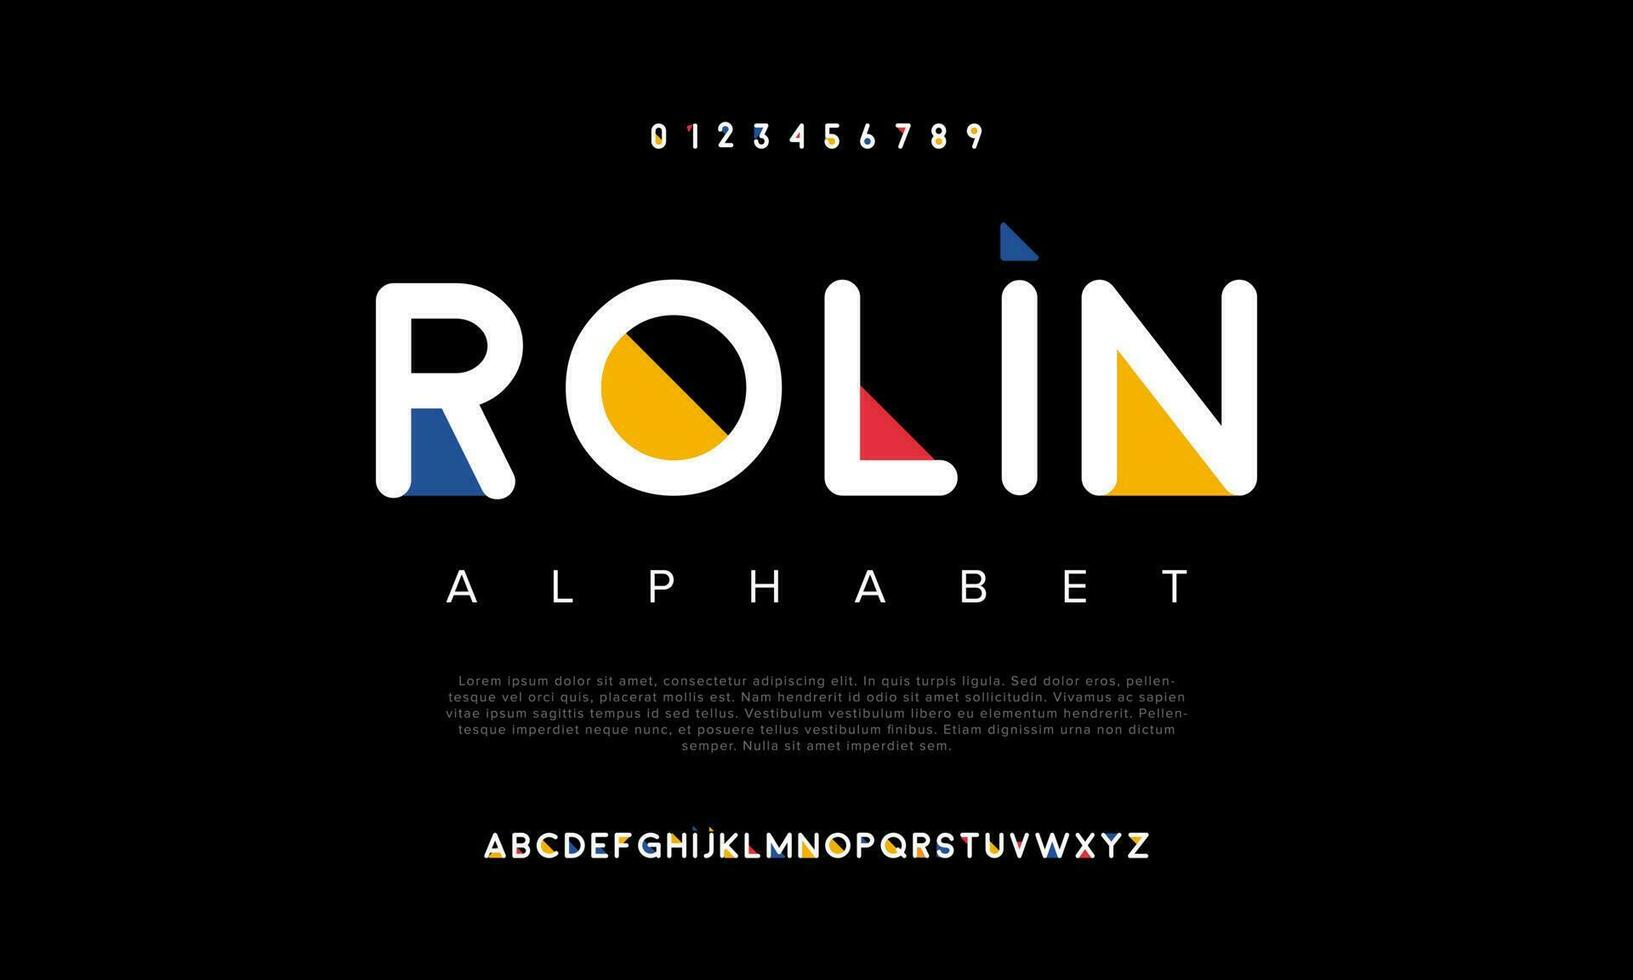 Rolin abstract digital technology logo font alphabet. Minimal modern urban fonts for logo, brand etc. Typography typeface uppercase lowercase and number. vector illustration